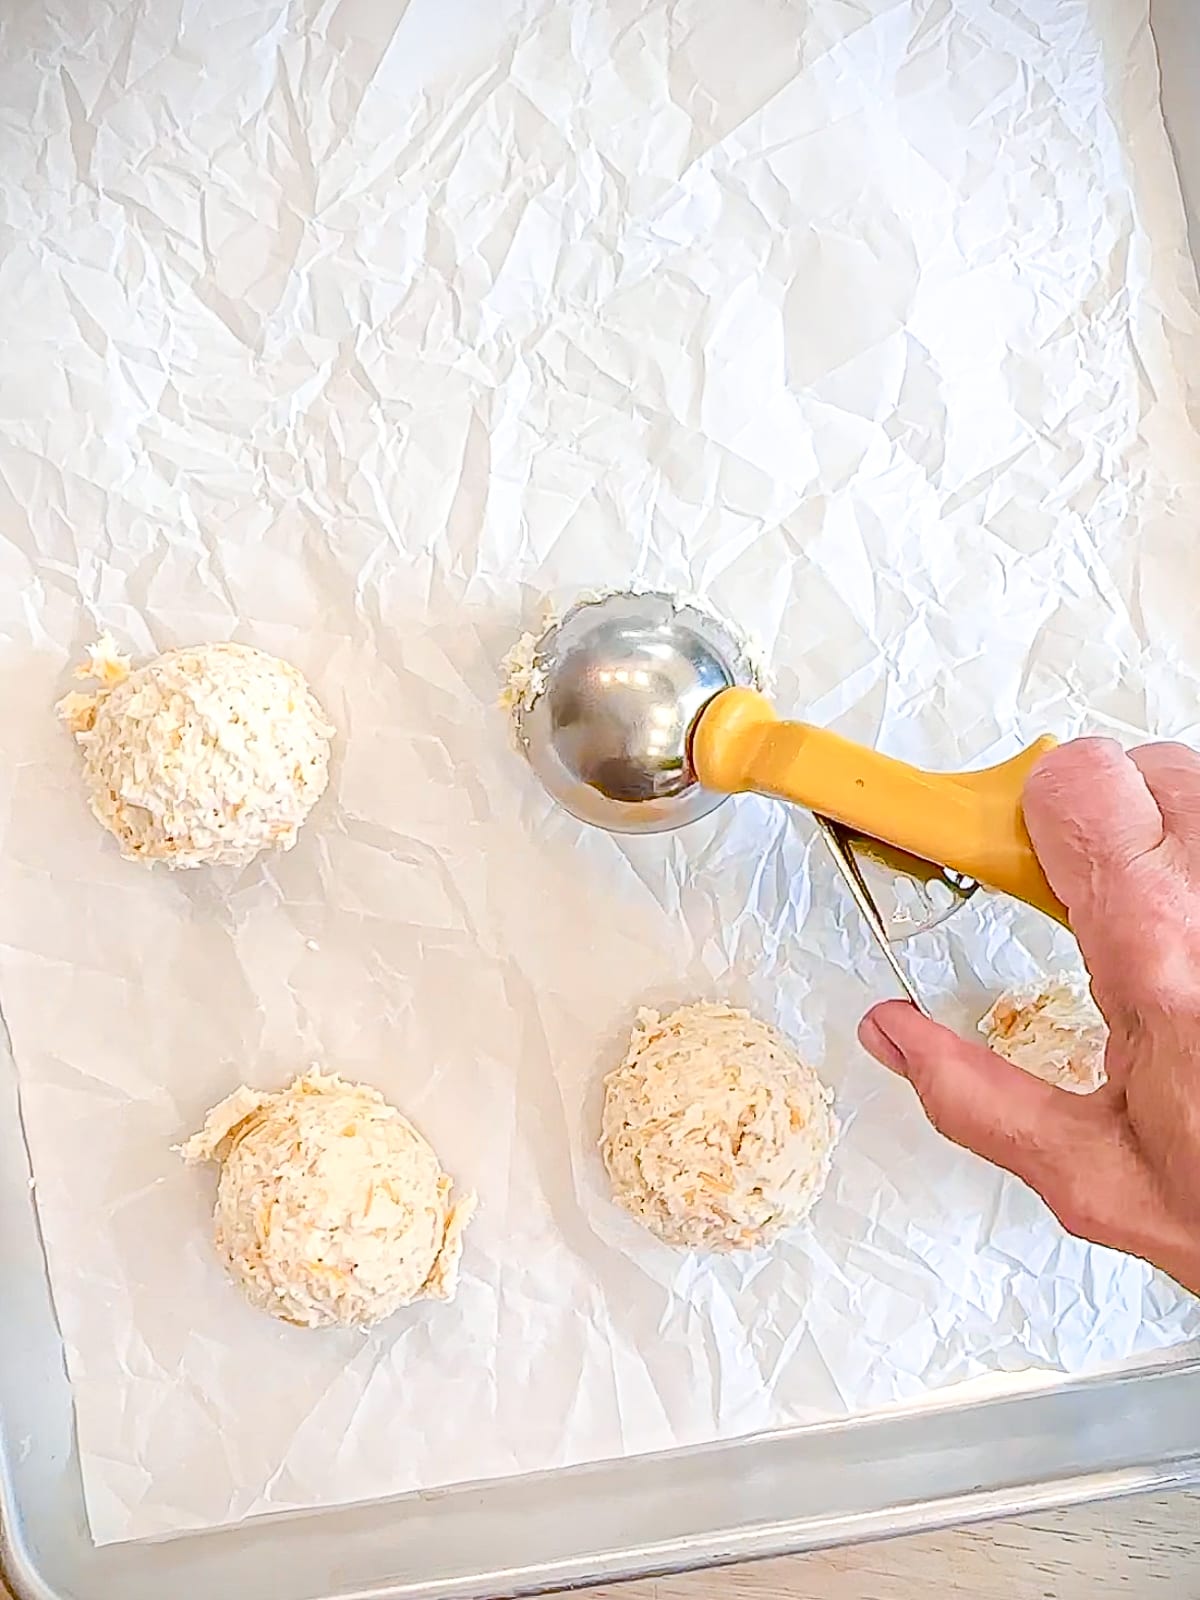 Dropping scoopfuls of biscuit dough onto parchment paper lined sheet pan.